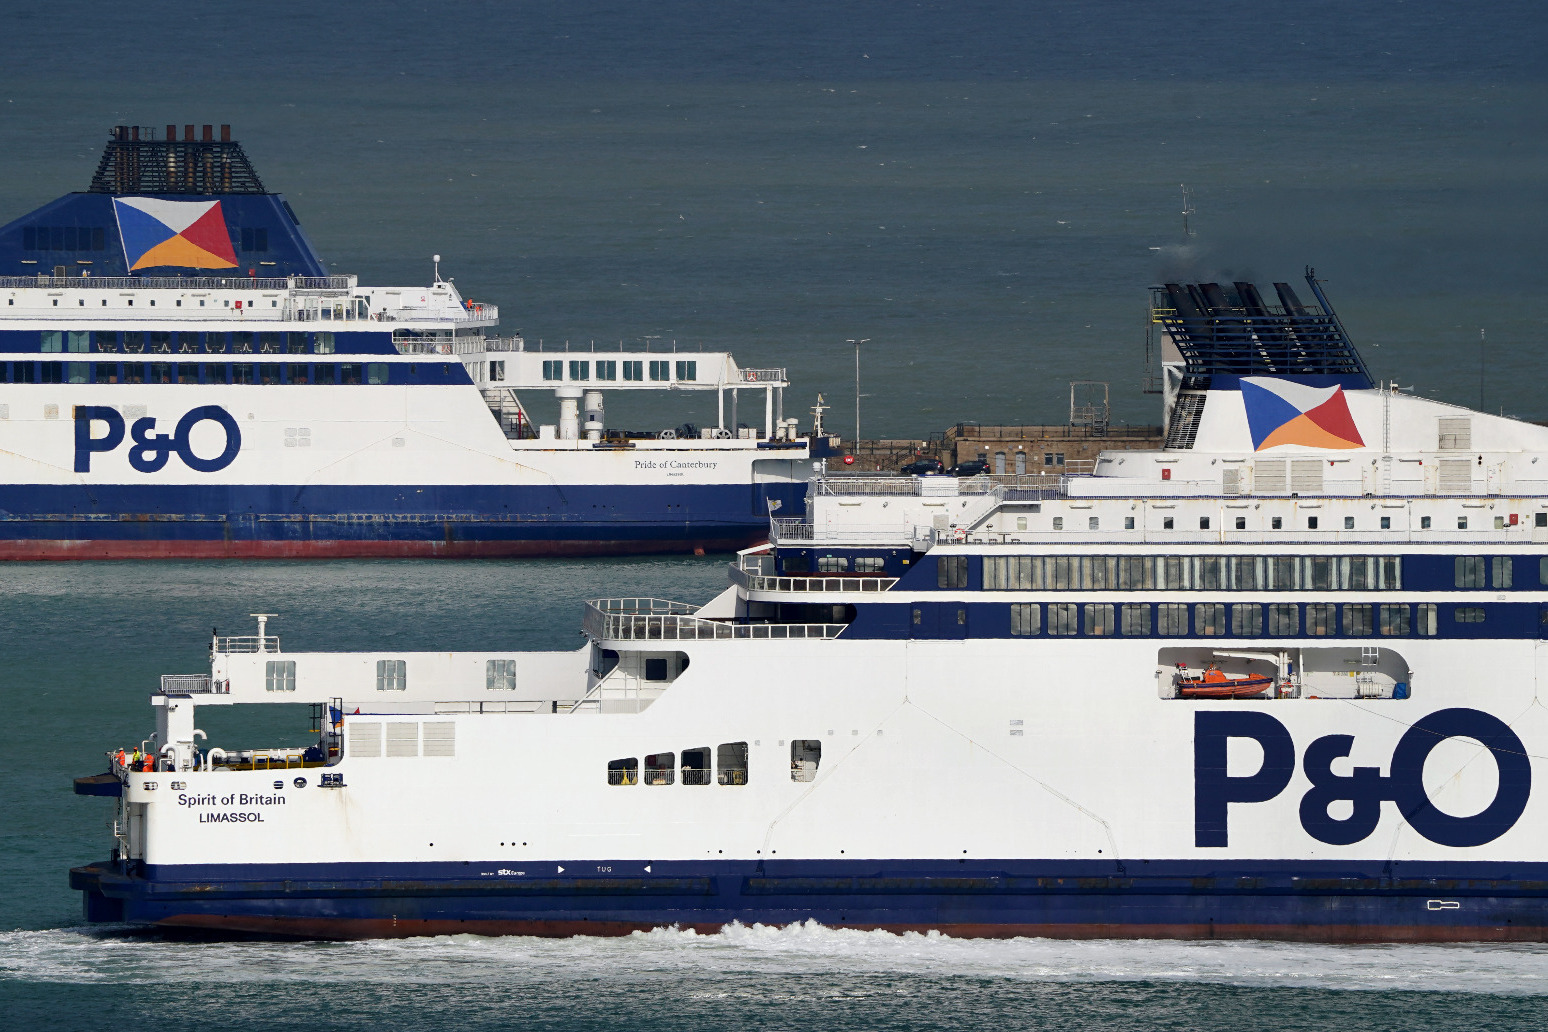 P&O Ferries have announced that they will run an amended service on Thursday 